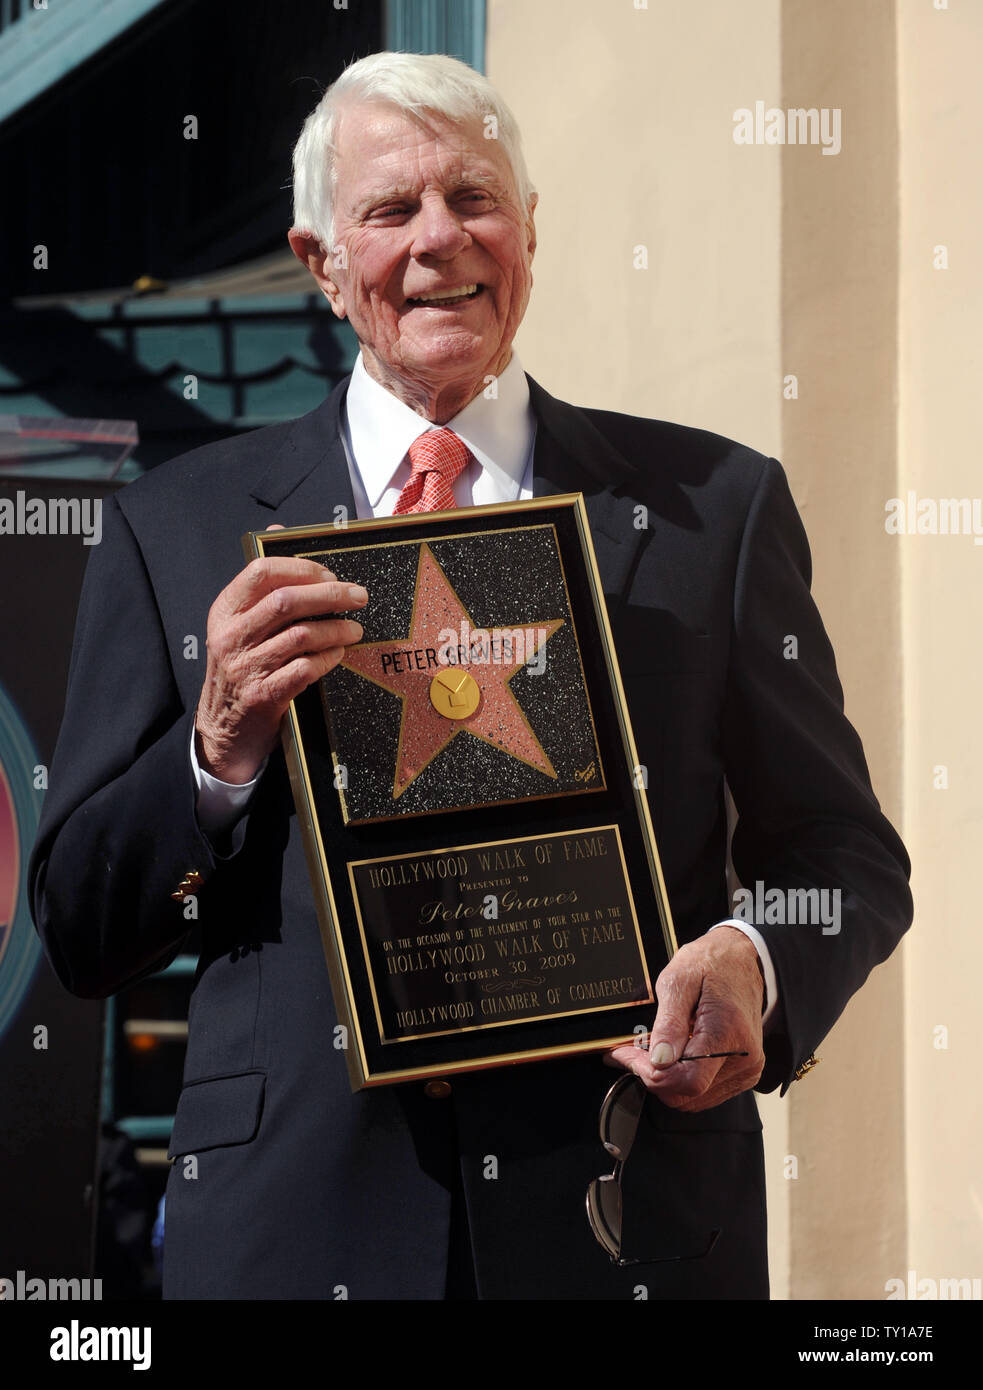 Actor Peter Graves holds a replica plaque during dedication ceremonies for Graves' star on the Hollywood Walk of Fame on October 30, 2009 in Los Angeles. His movie career spanned classics such as 'Stalag 17' to comedies such as 'Airplane!', but he is best remembered by many as the head of the 'Mission: Impossible' force in the 1960s and 70s.     UPI/Jim Ruymen. Stock Photo